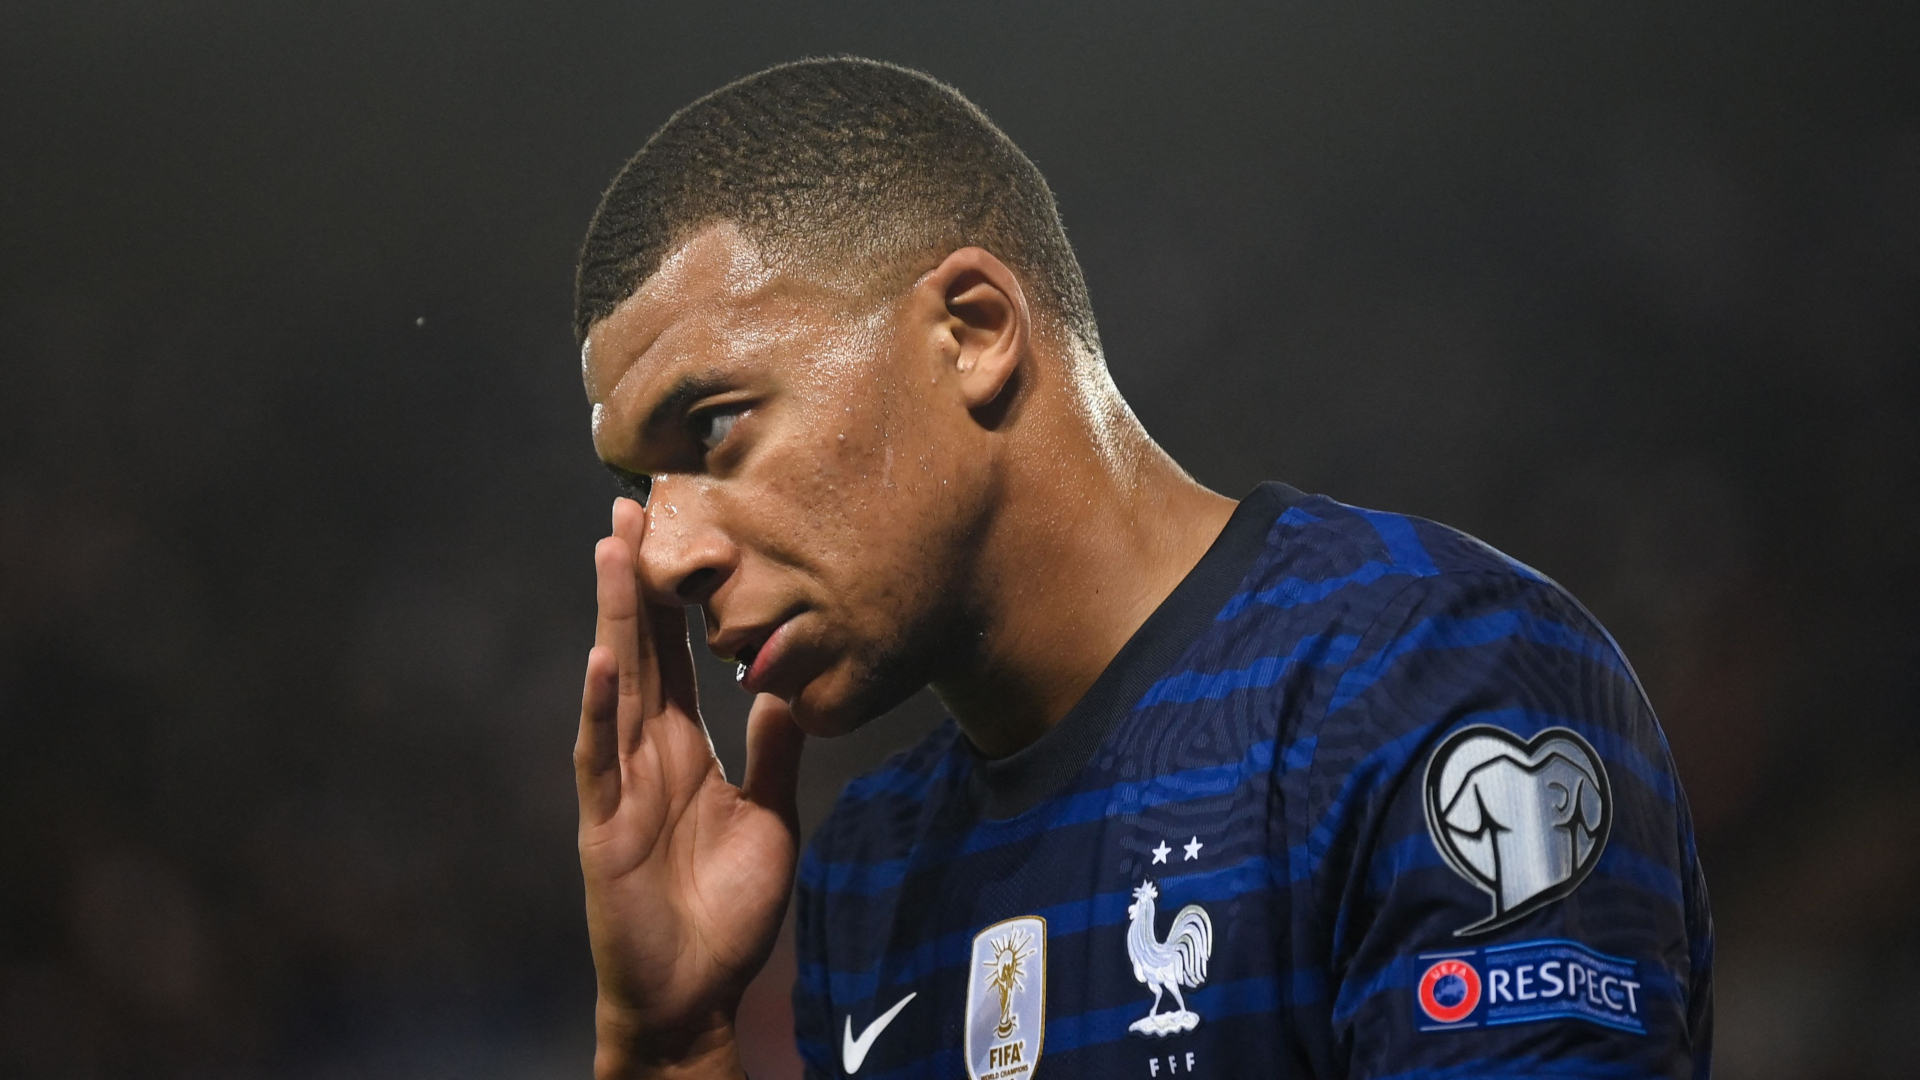 Mbappe claims French national team made him feel like a 'problem' after Euro 2020 penalty miss